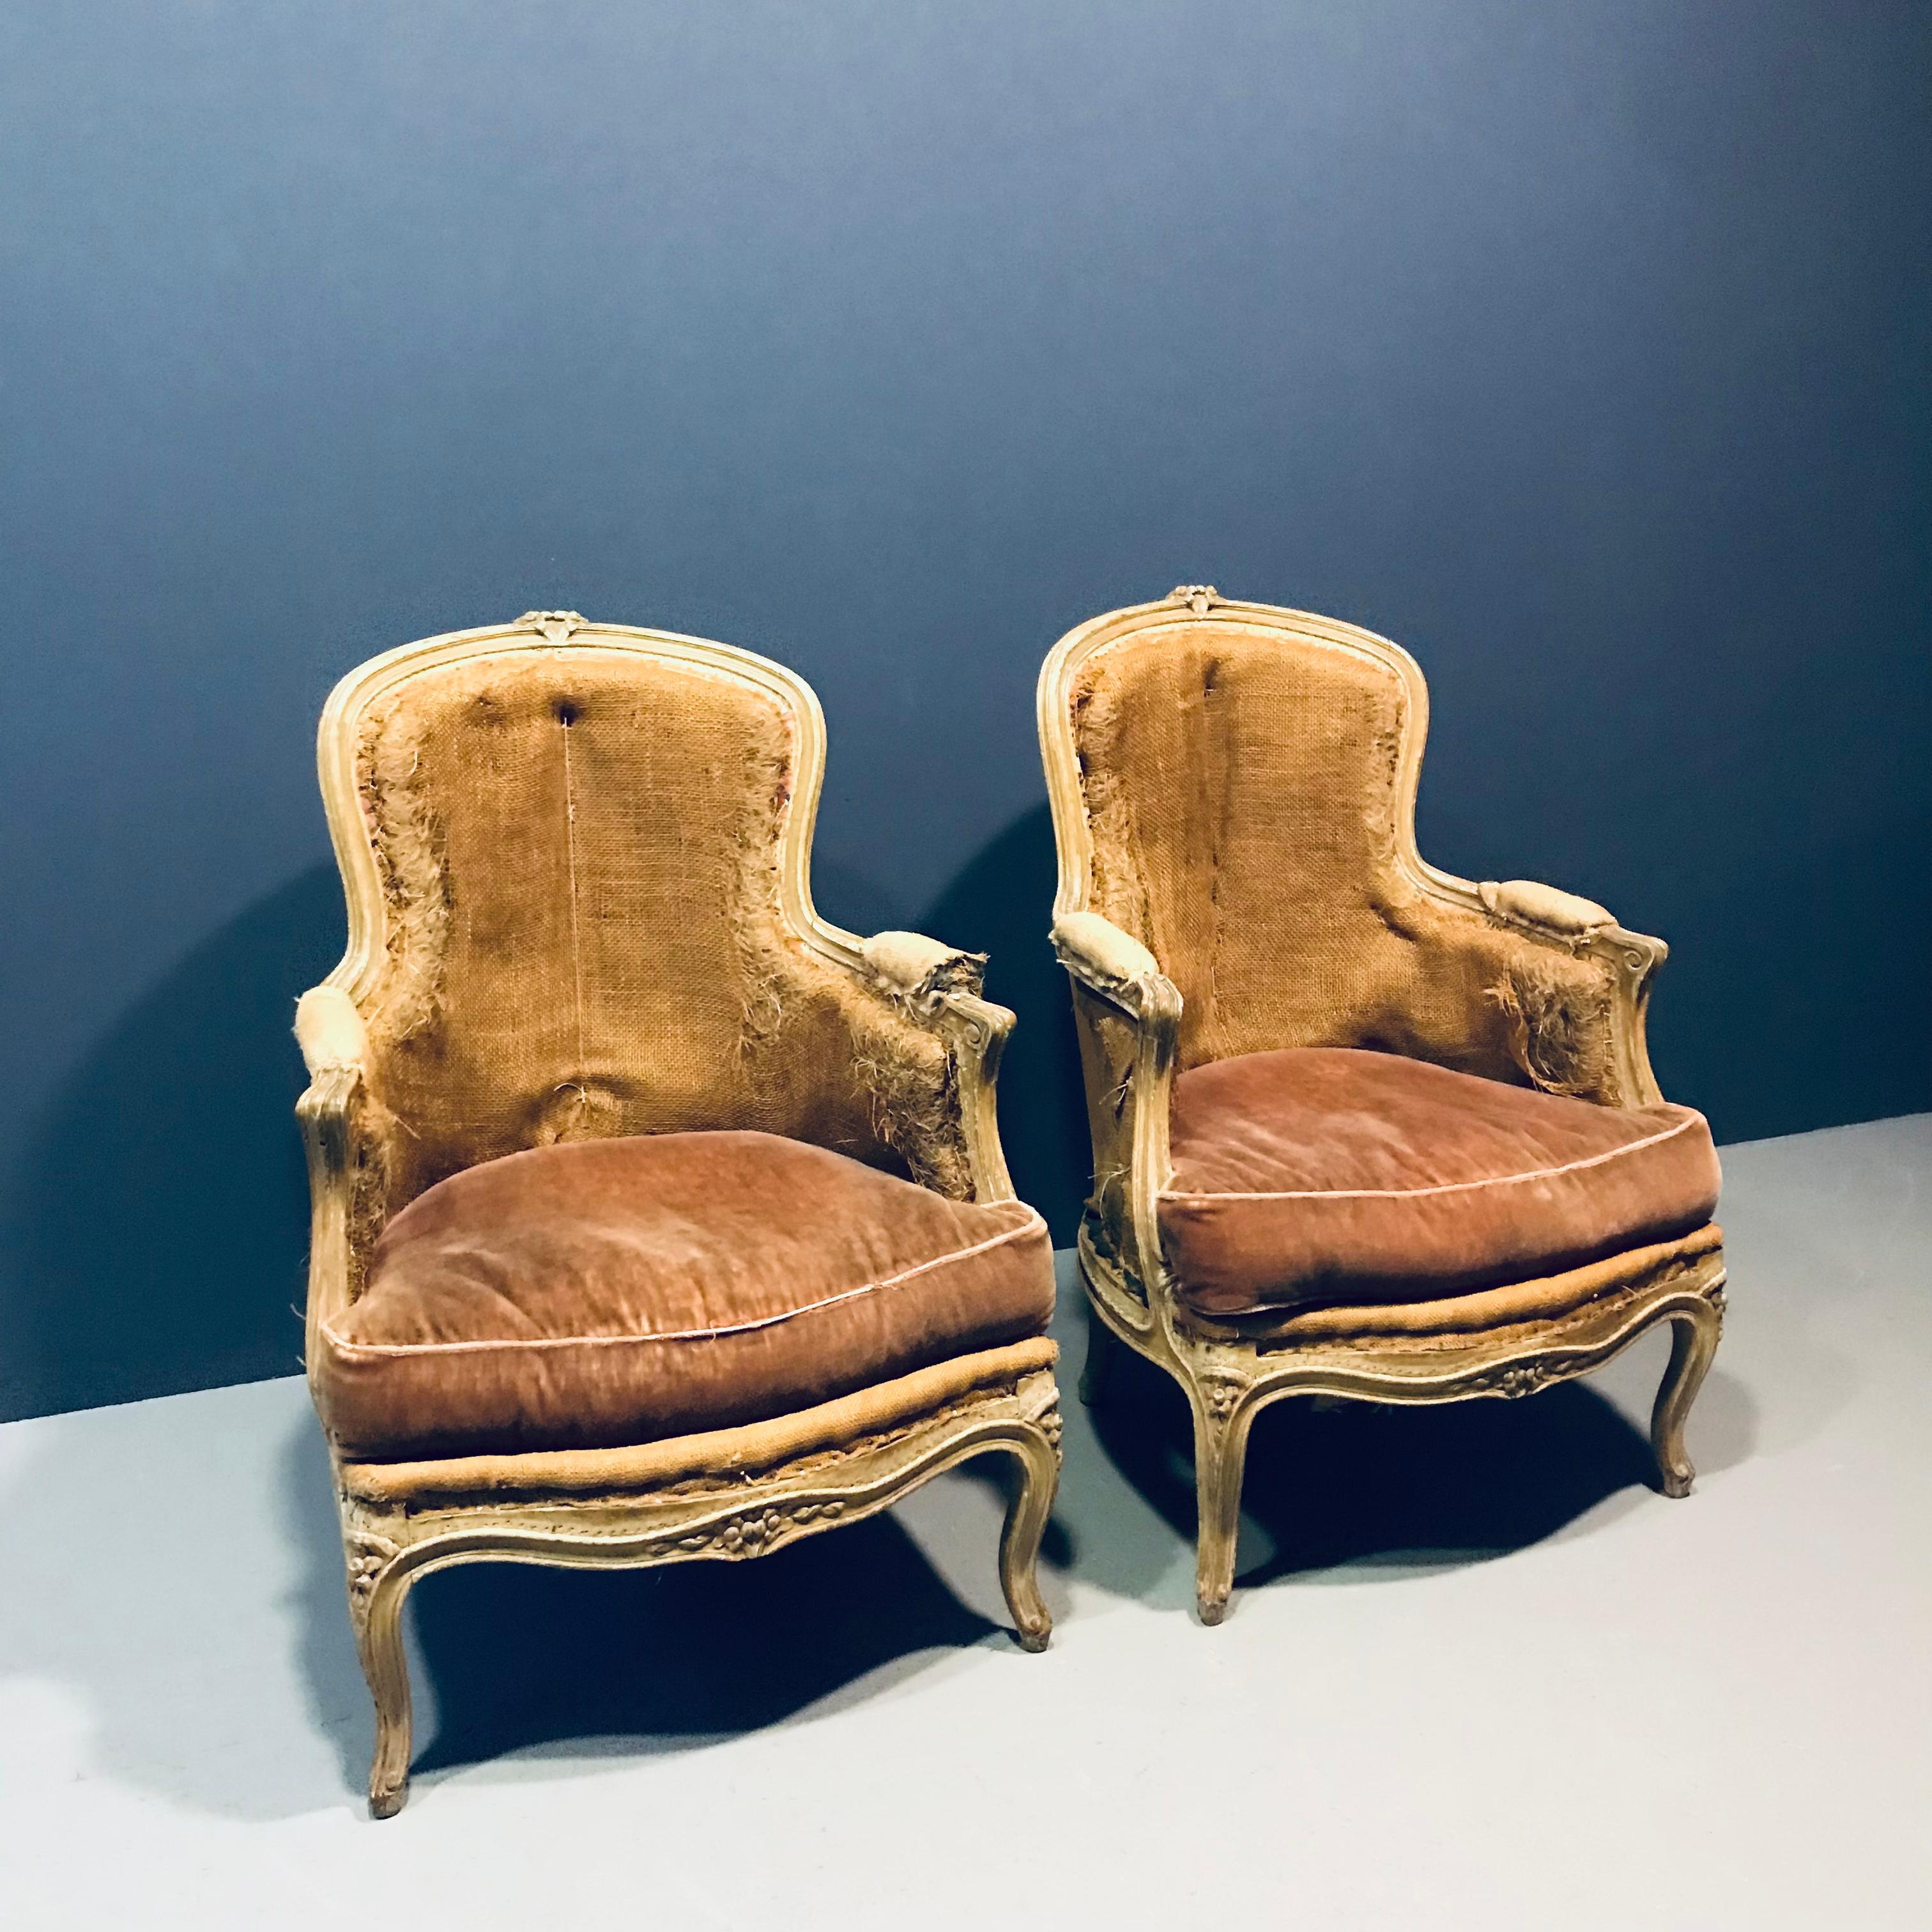 19th century French Louis XV Bergère armchairs in their original patina still very comfortable, perfect for deco or your next project! The chairs wood frame is nicely carved. The cabriole legs end in scrolls giving this classic piece an elegant